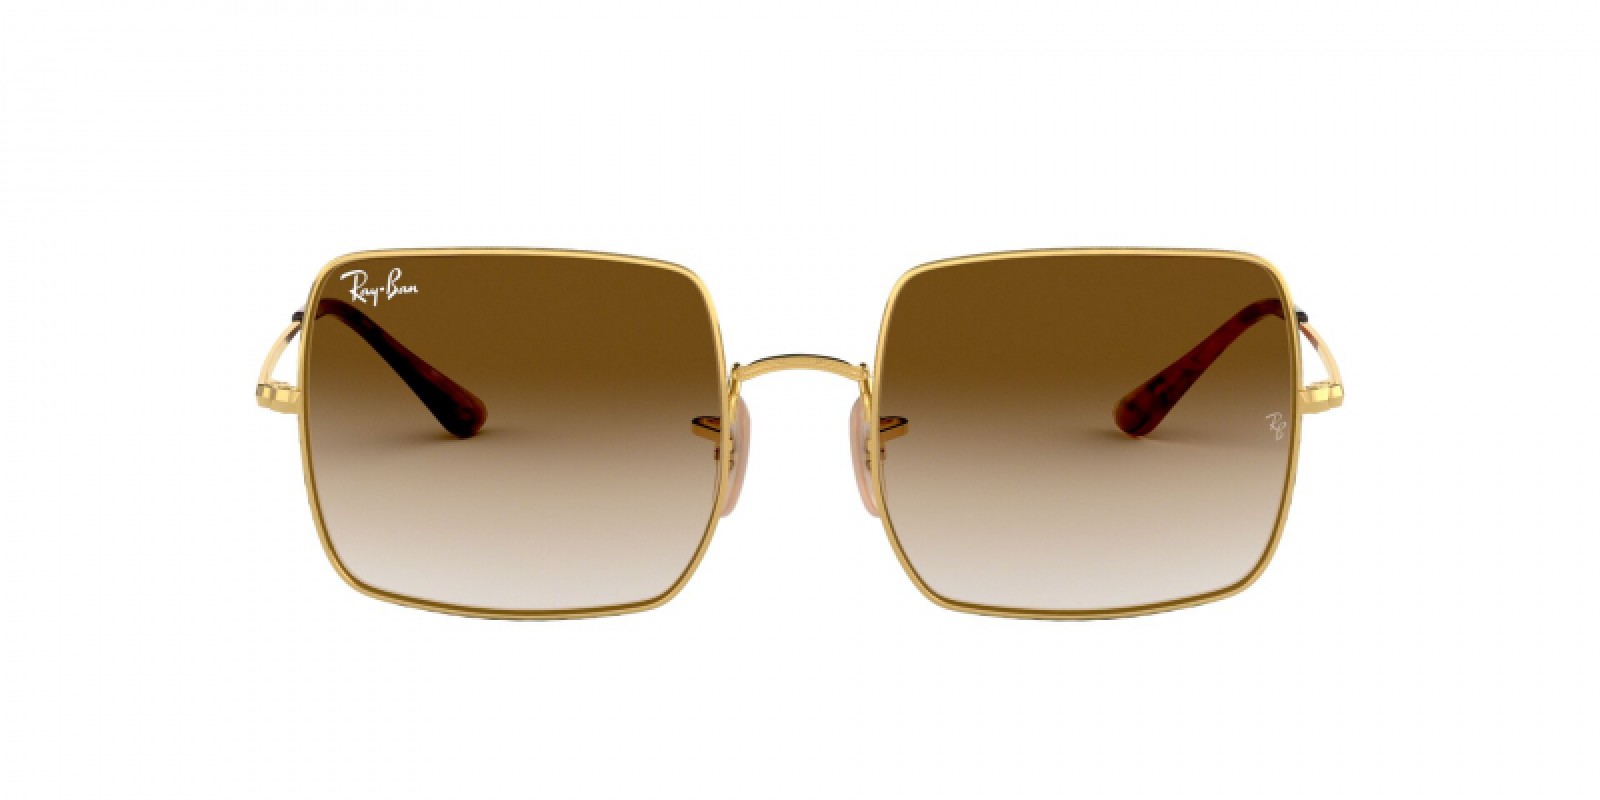 Ray-Ban RB1971 9147/51 Square